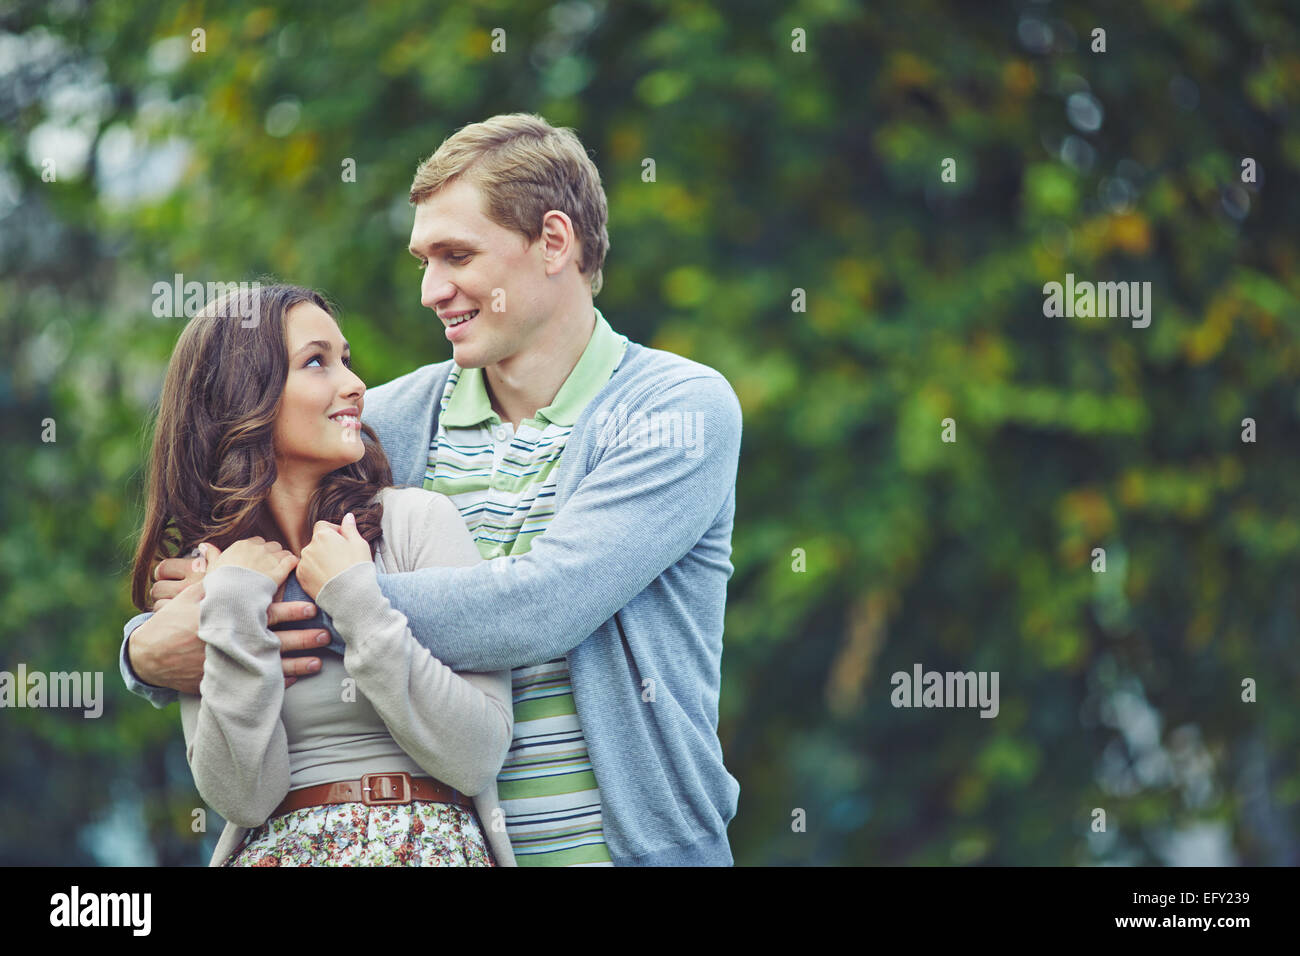 Affectionate young couple in natural environment Stock Photo